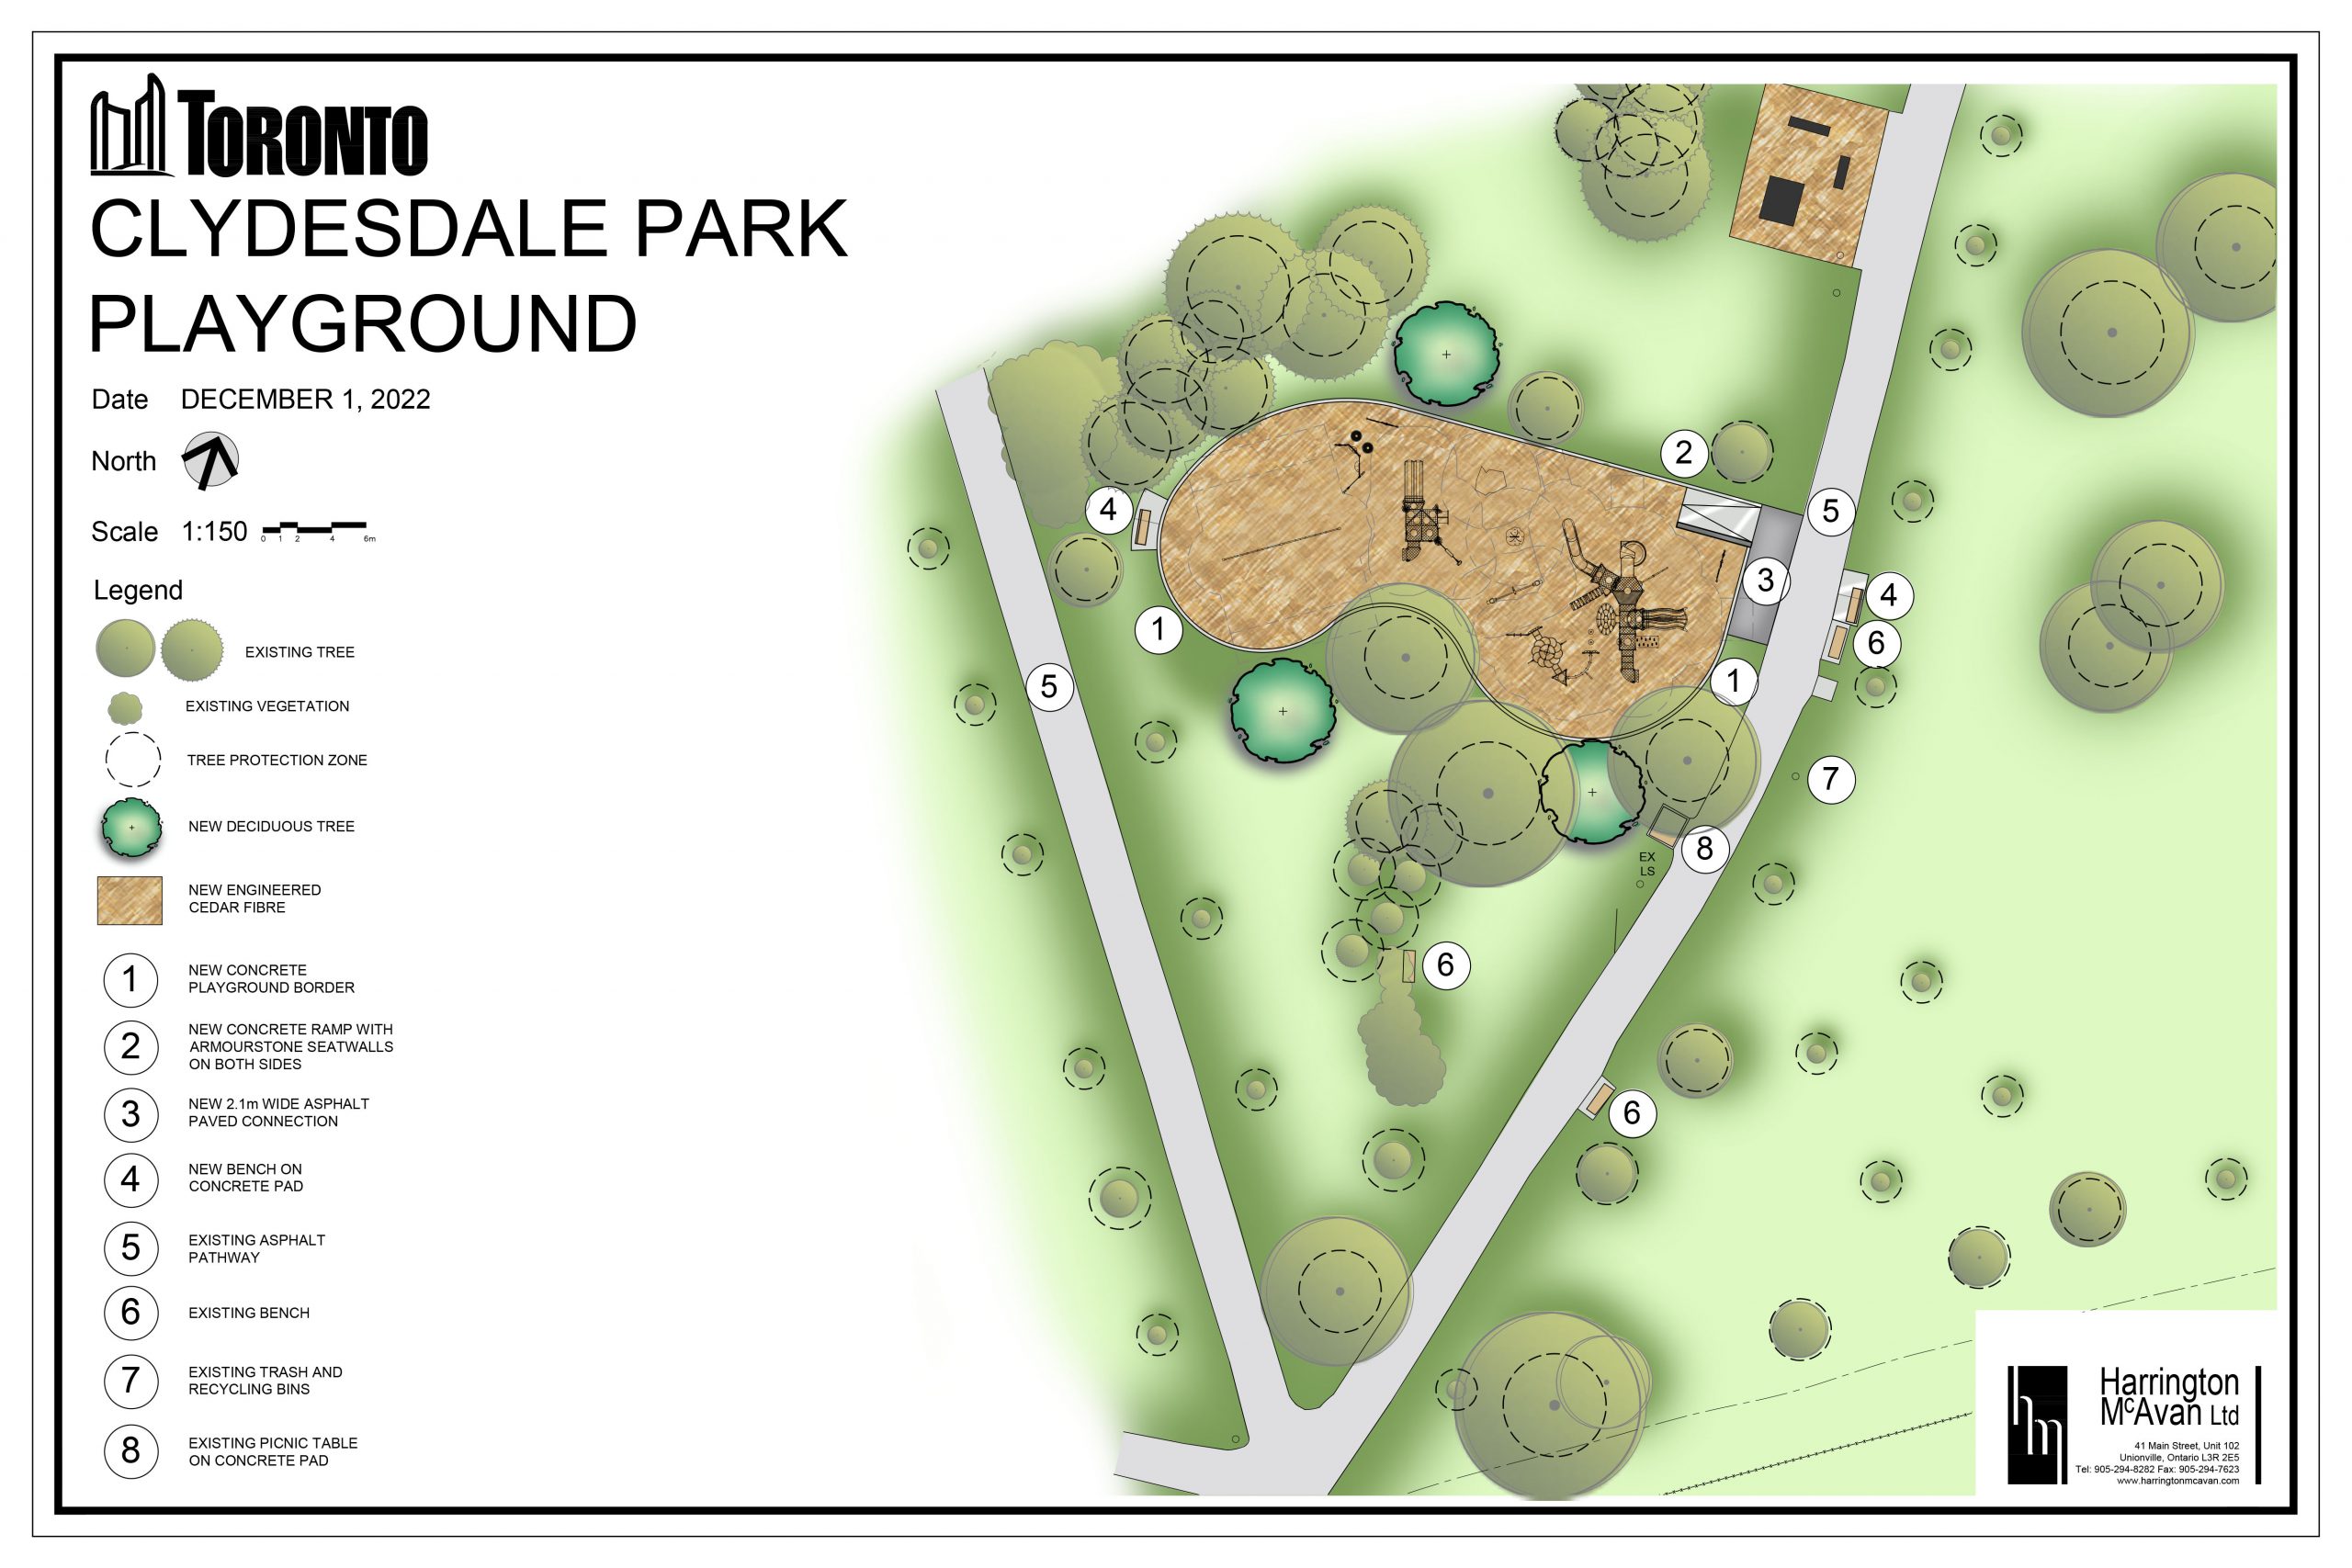 The new rendered plan of the playground. It includes an overhead plan showing the layout of the playground and adjacent pathway, trees, and landscape. 